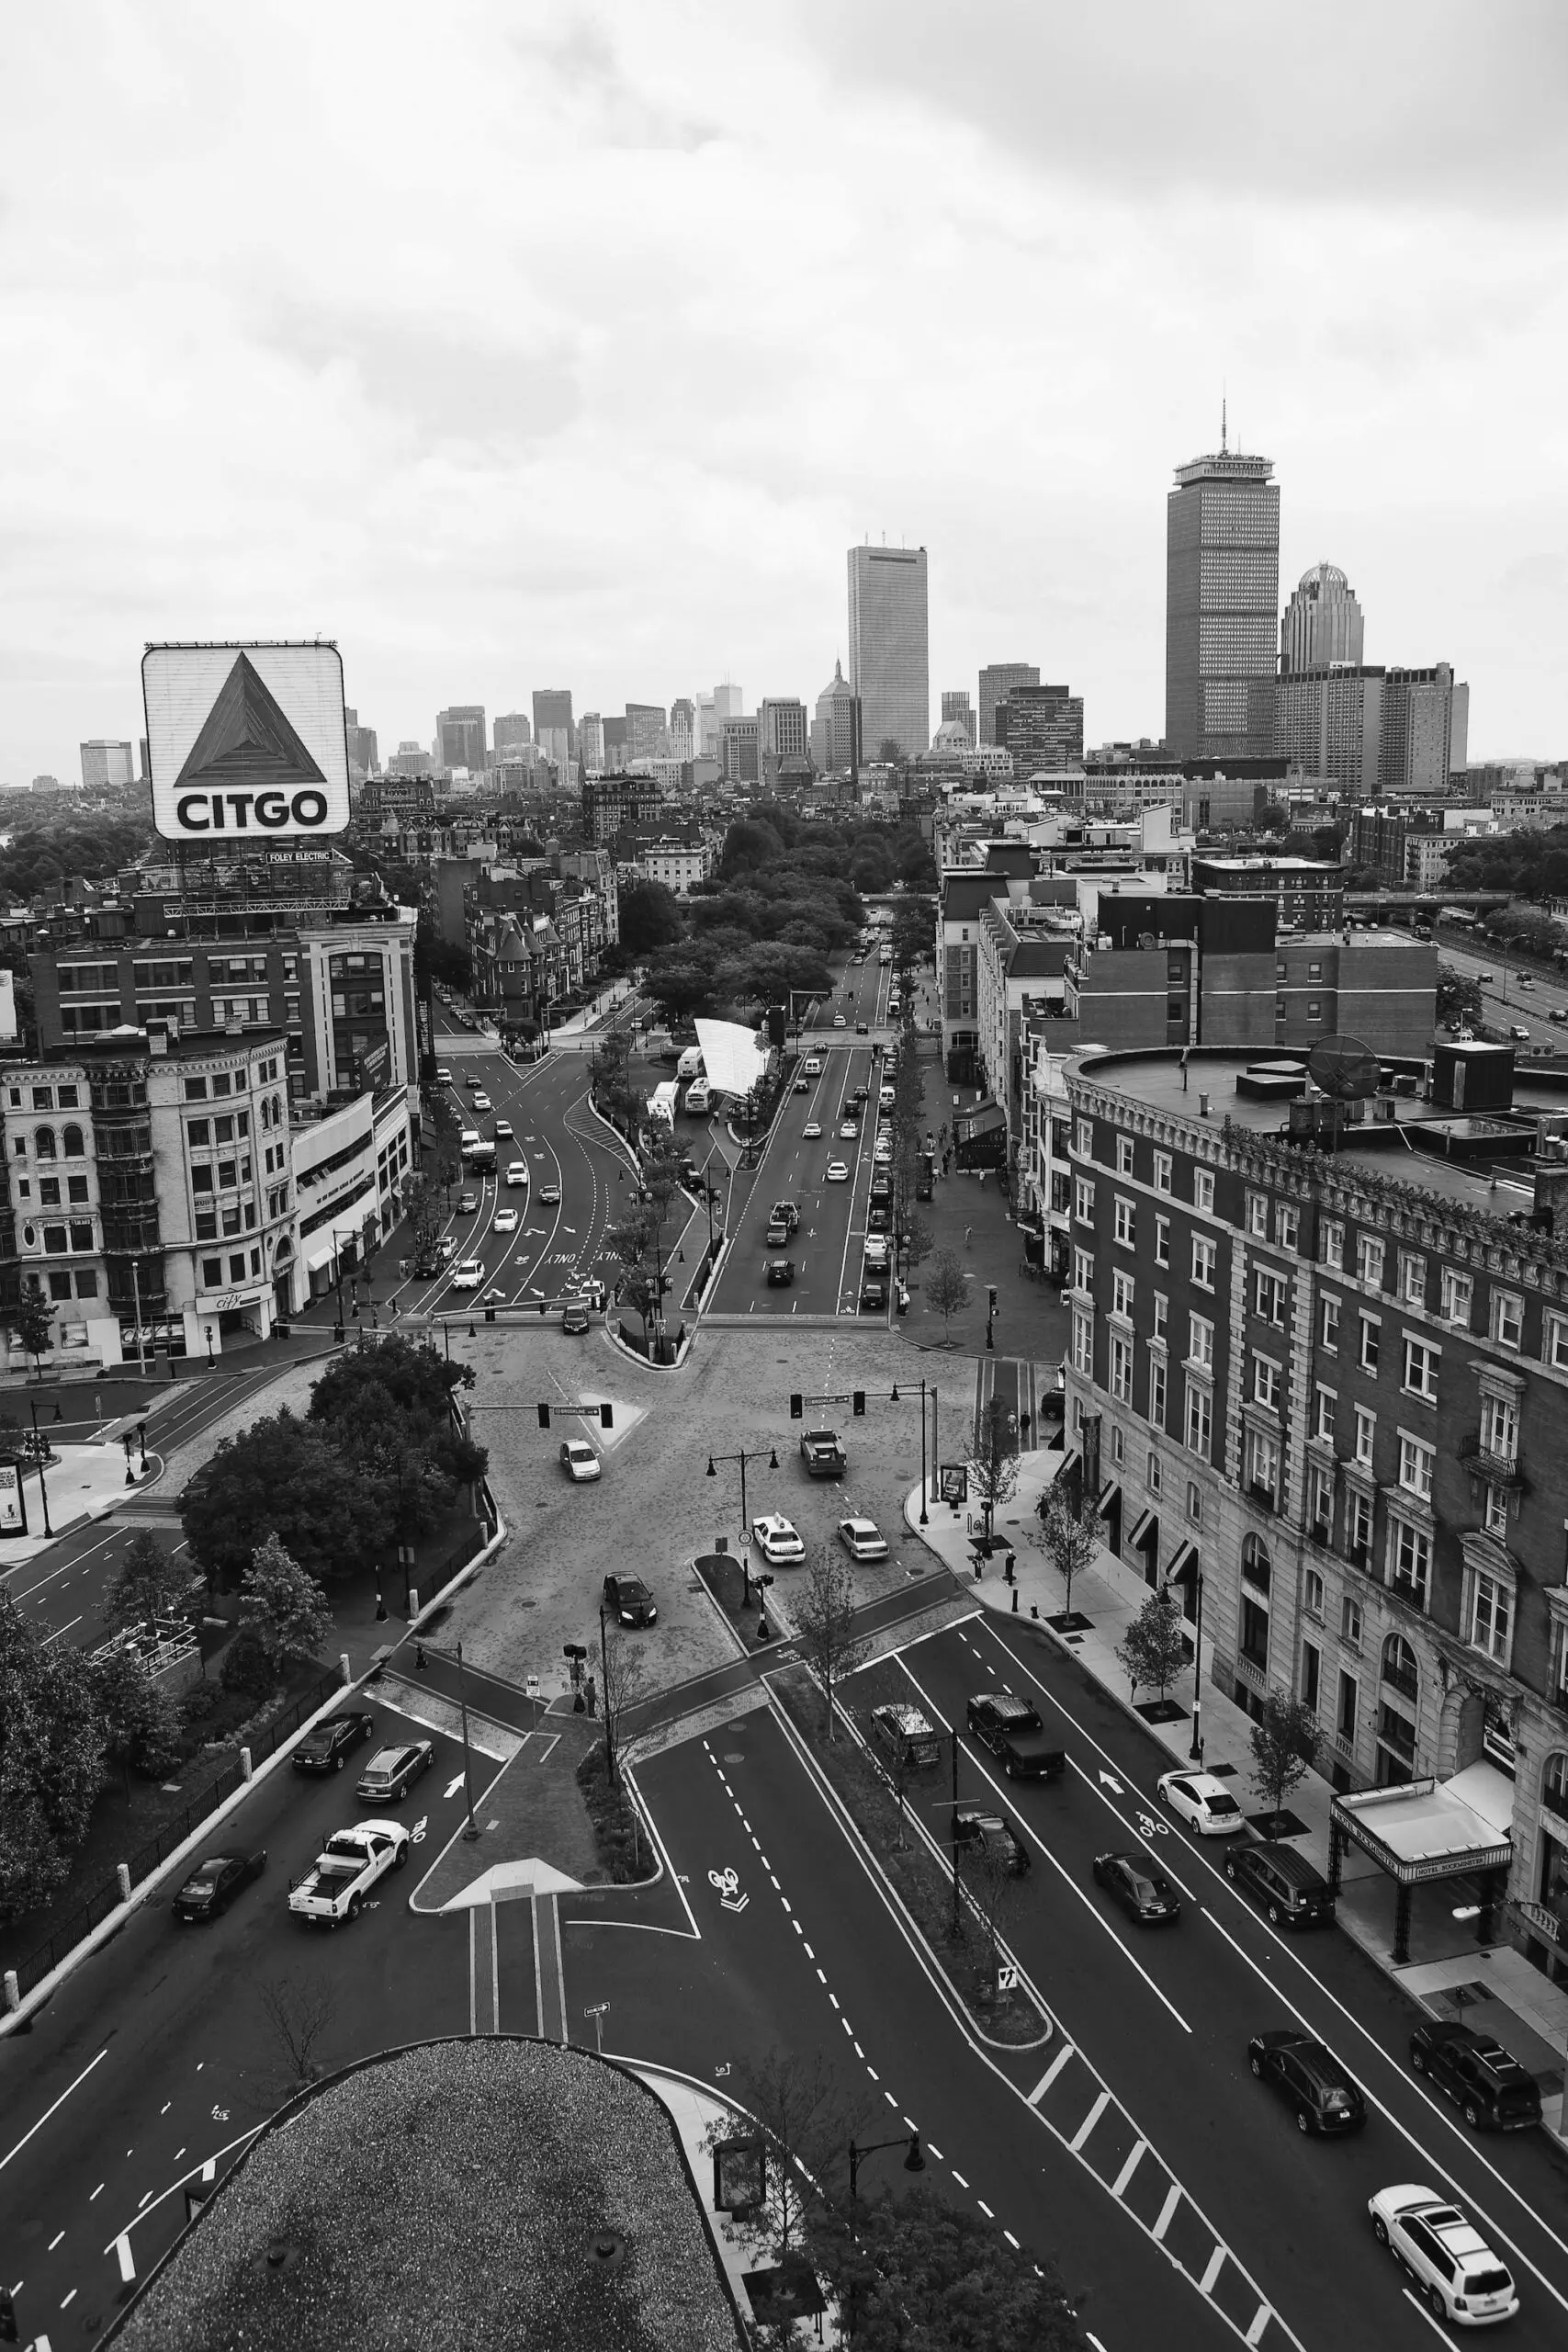 Boston's Kenmore Square, where police and baseball fans clashed following the Red Sox's American League Championship Series victory over the New York Yankees in 2004.